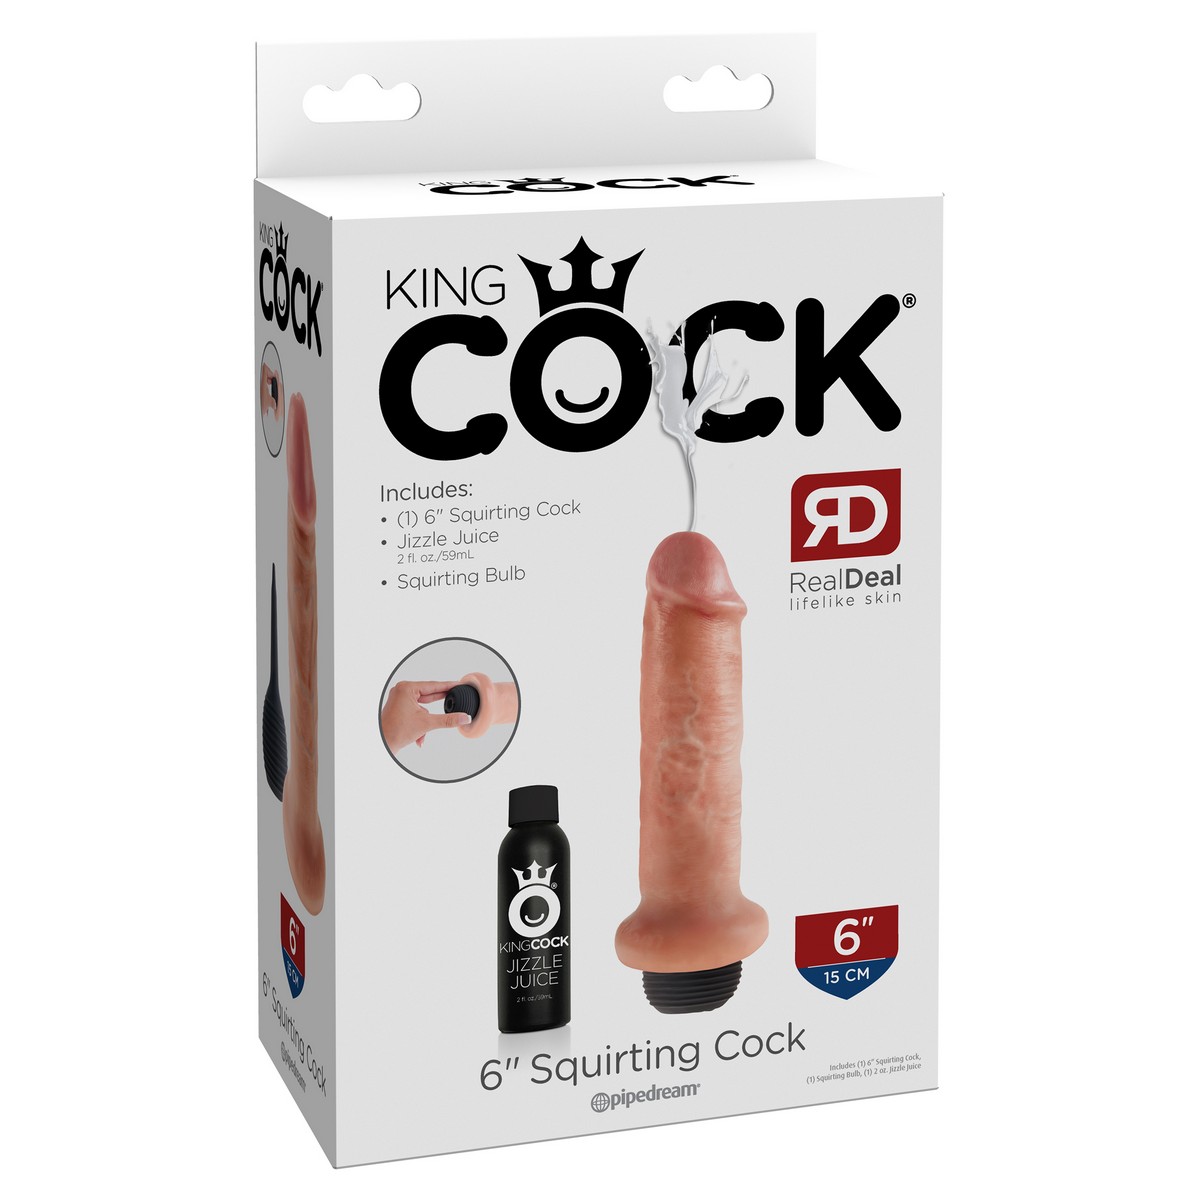    6 Squirting Cock